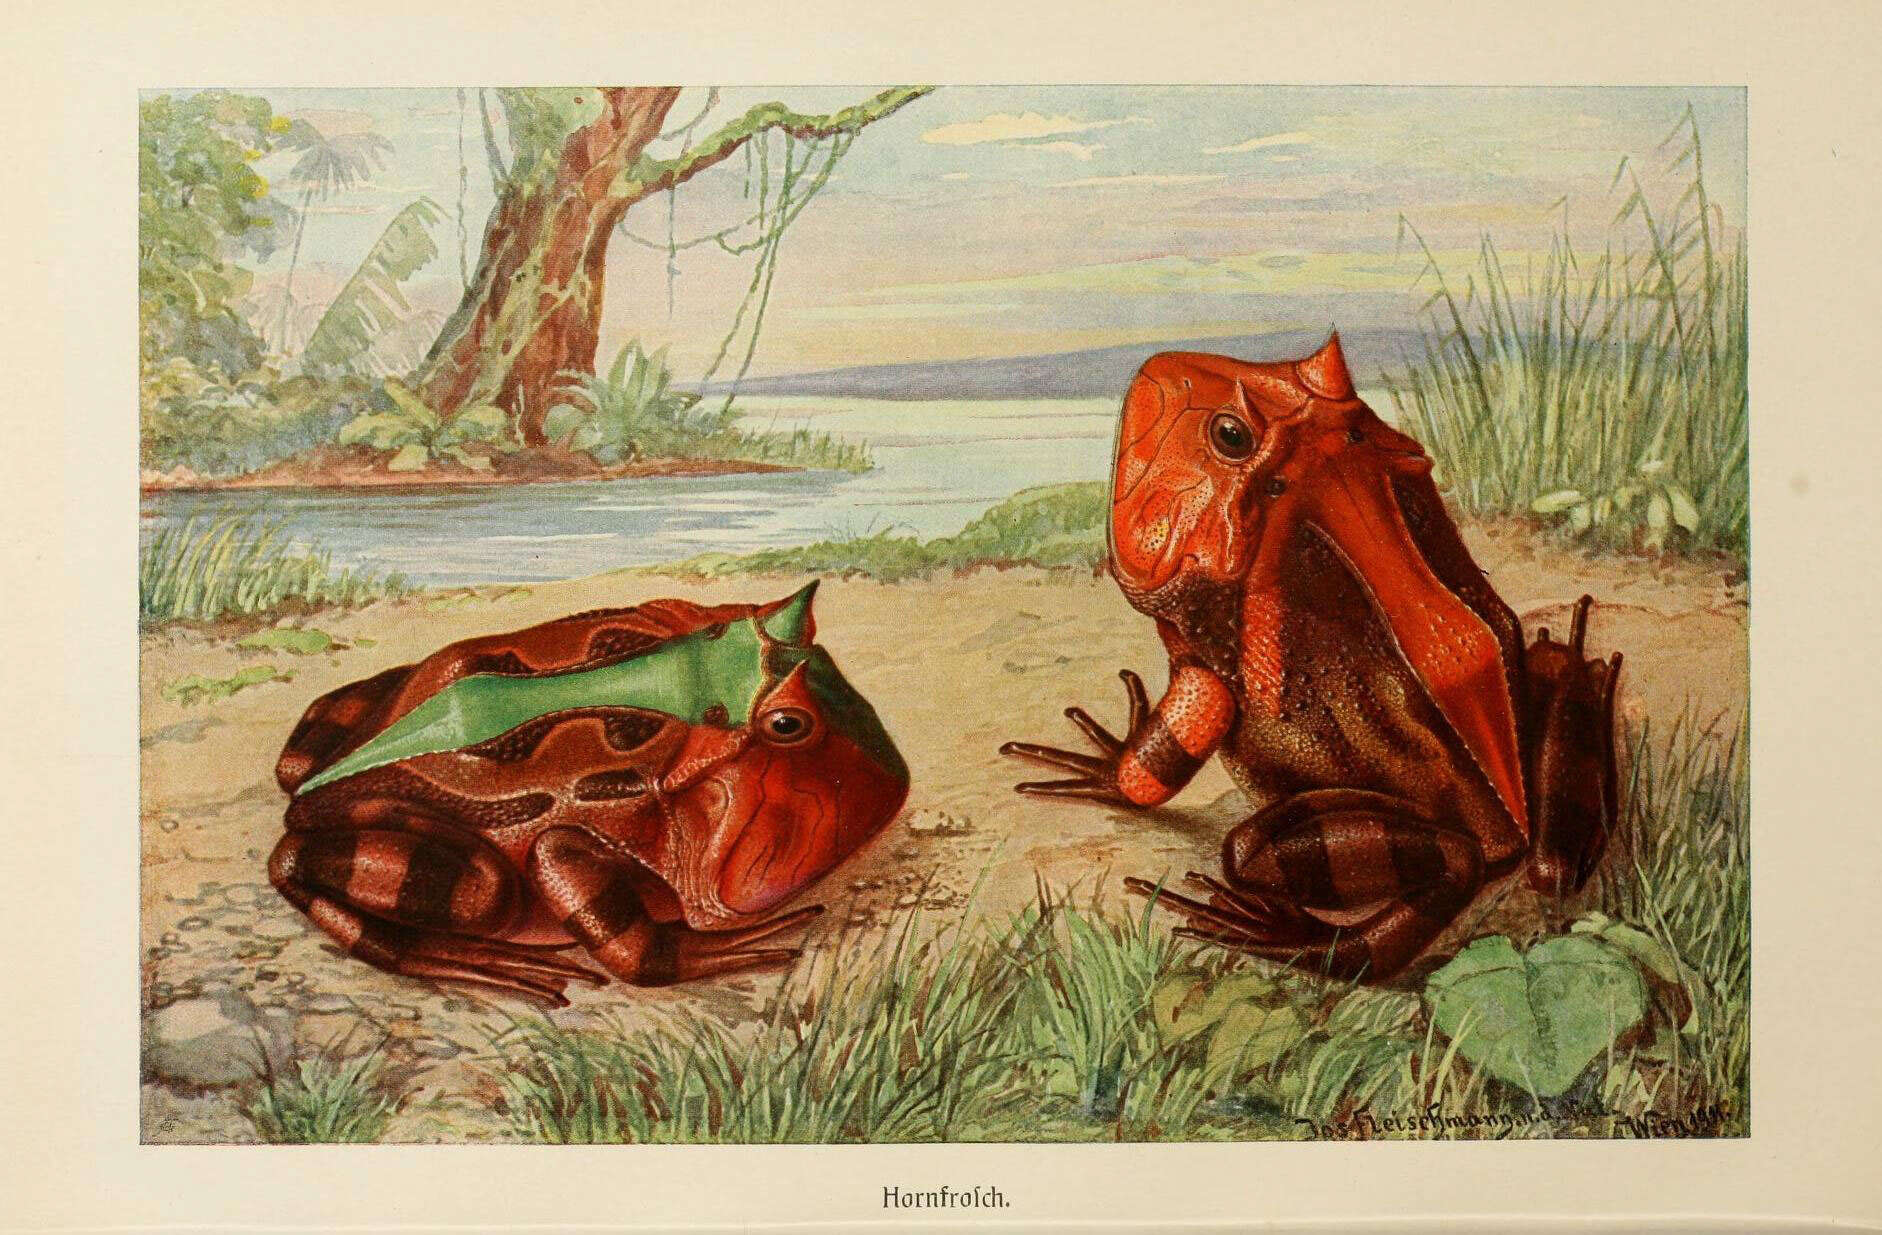 Image of Common Horned Frogs